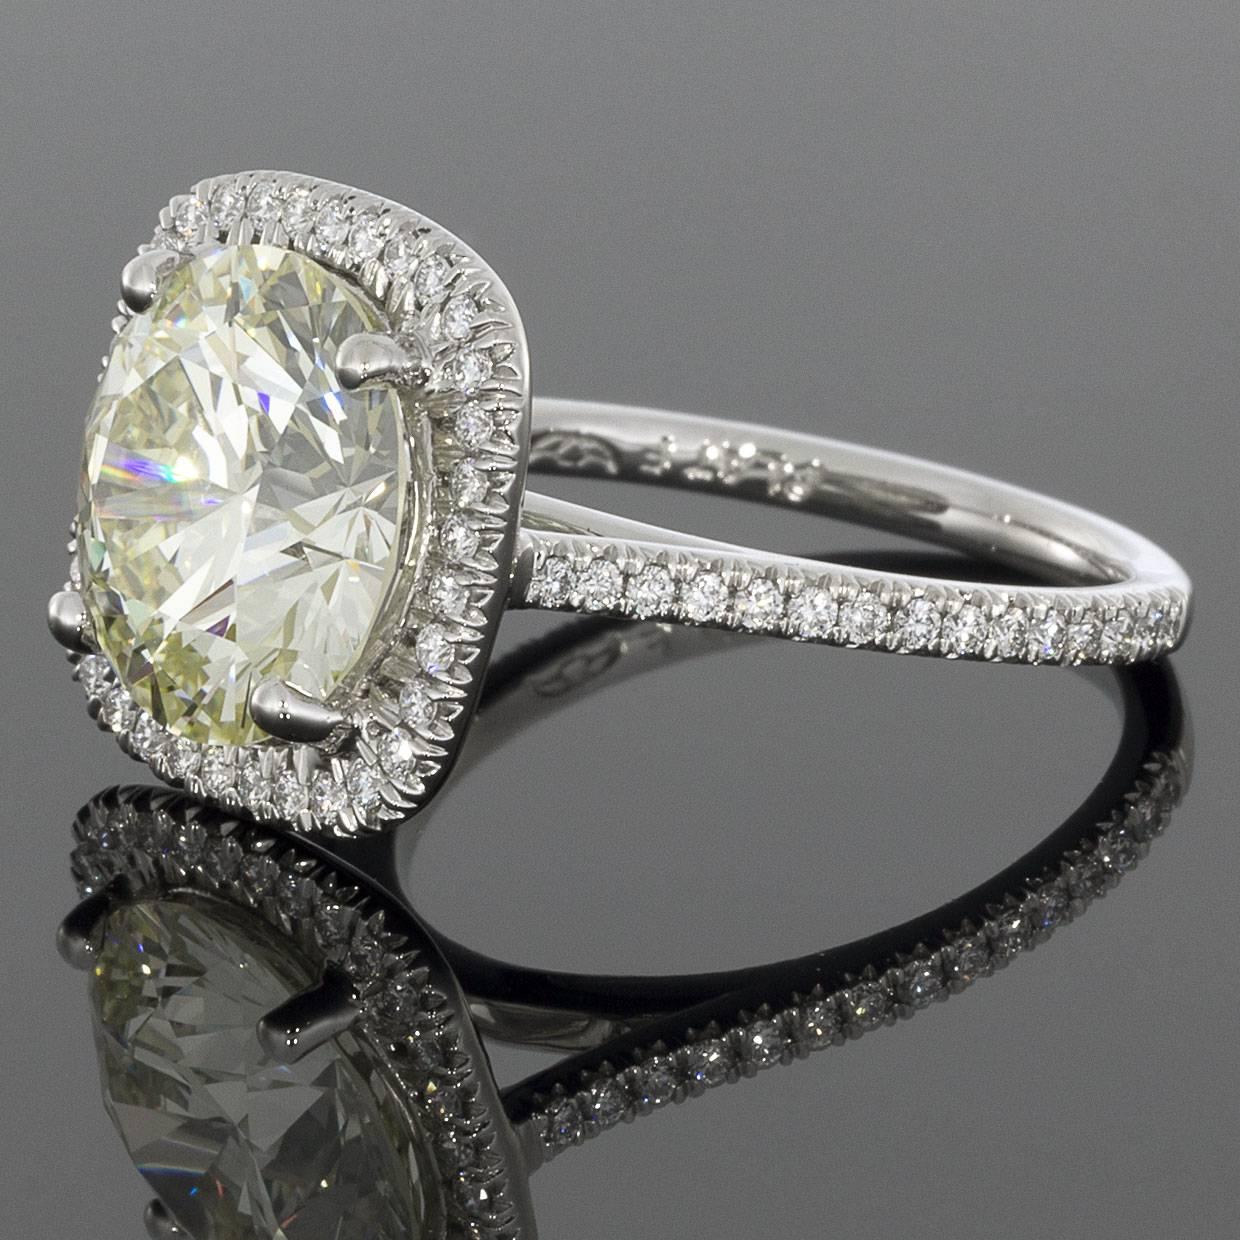 Take her breath away with this spectacular 5.42CTW diamond ring from Martin Flyer! This 65 year old, third generation family owned business handcrafts all their rings with extraordinary attention to detail, using only the highest quality, Hearts &